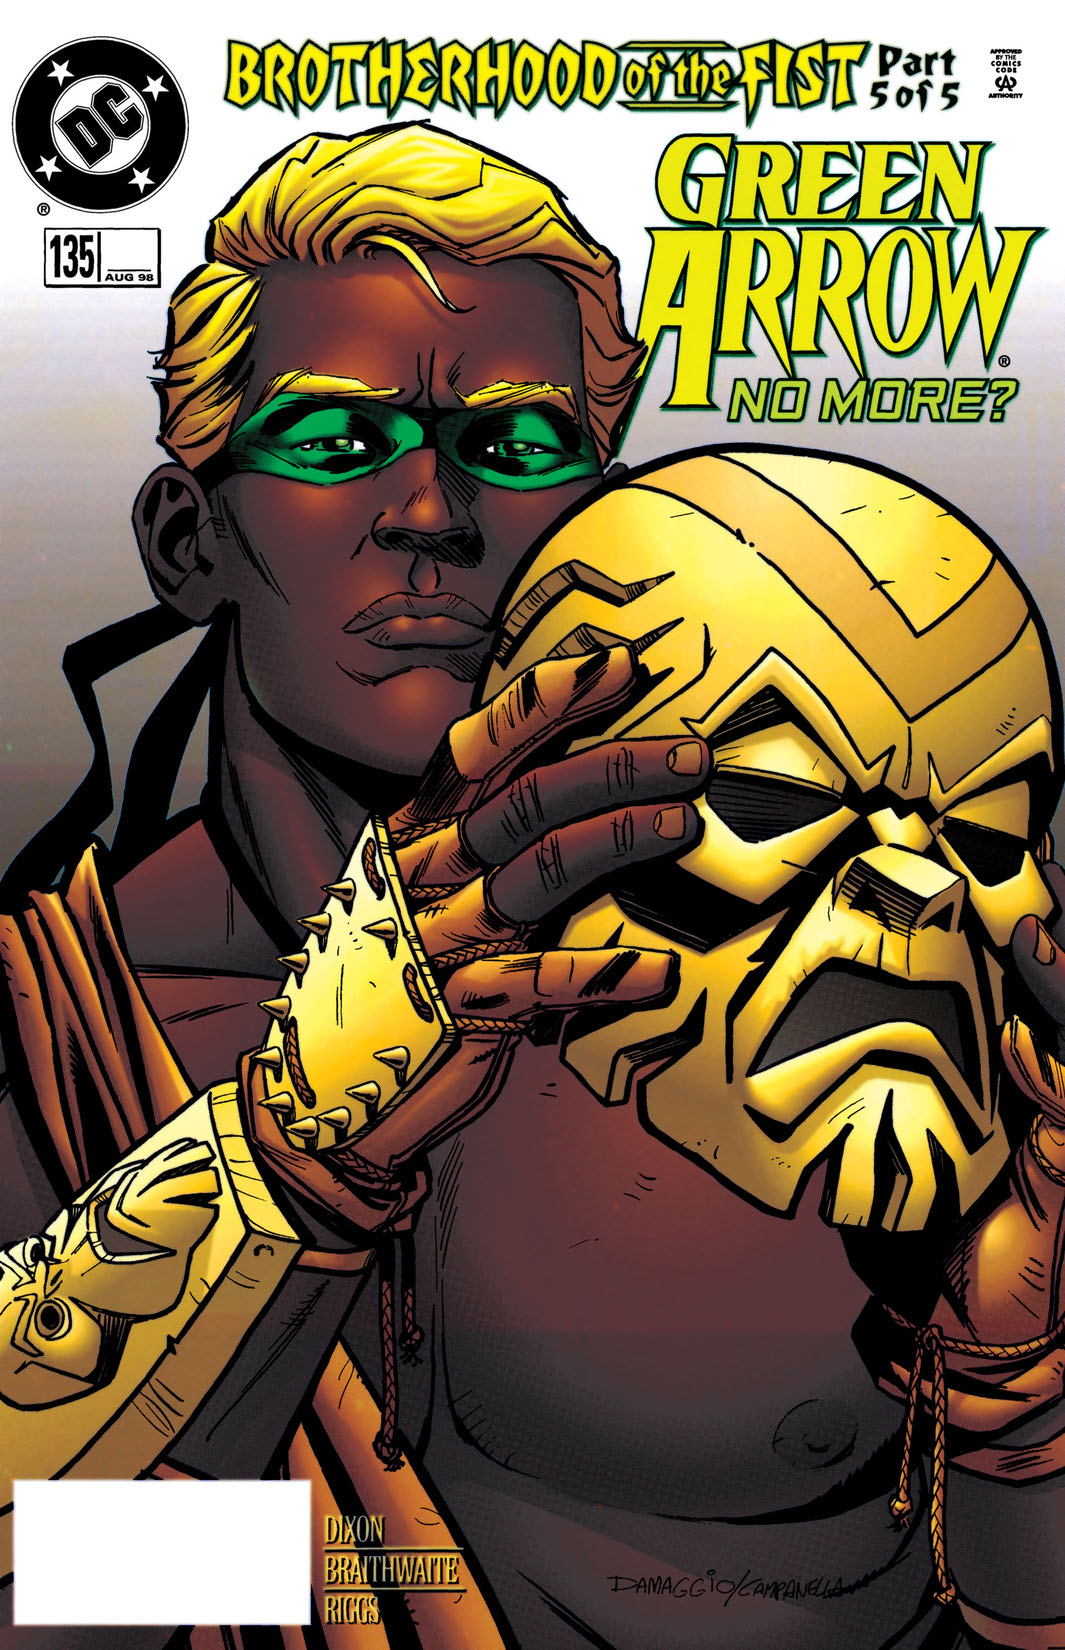 Green Arrow (1987-) #135 preview images